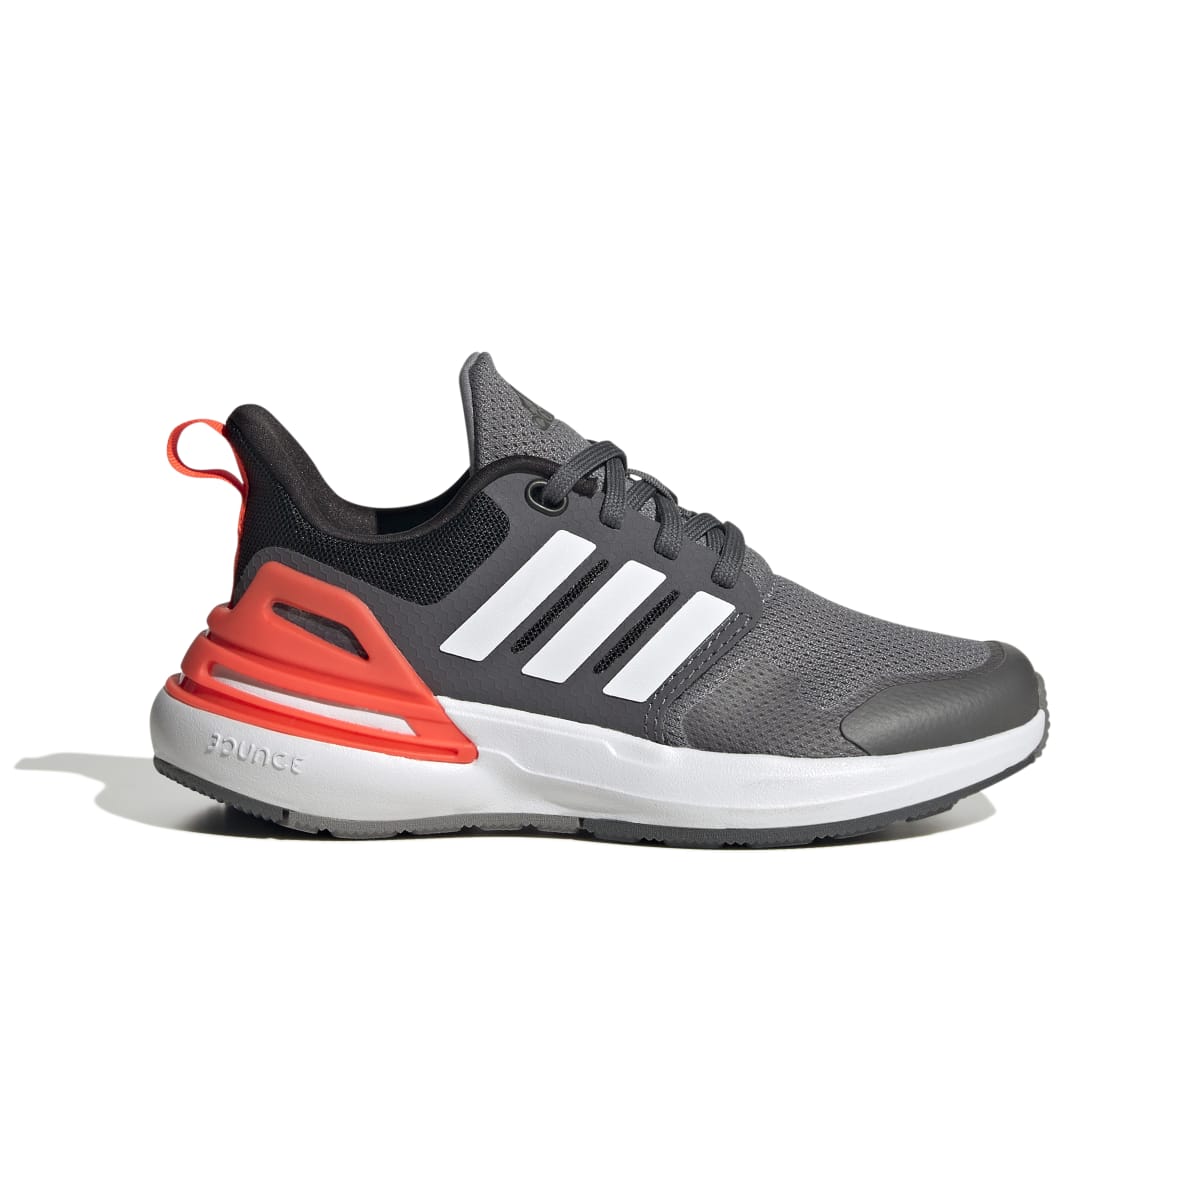 Brands > Adidas > Youth's Shoes > Shop By Size